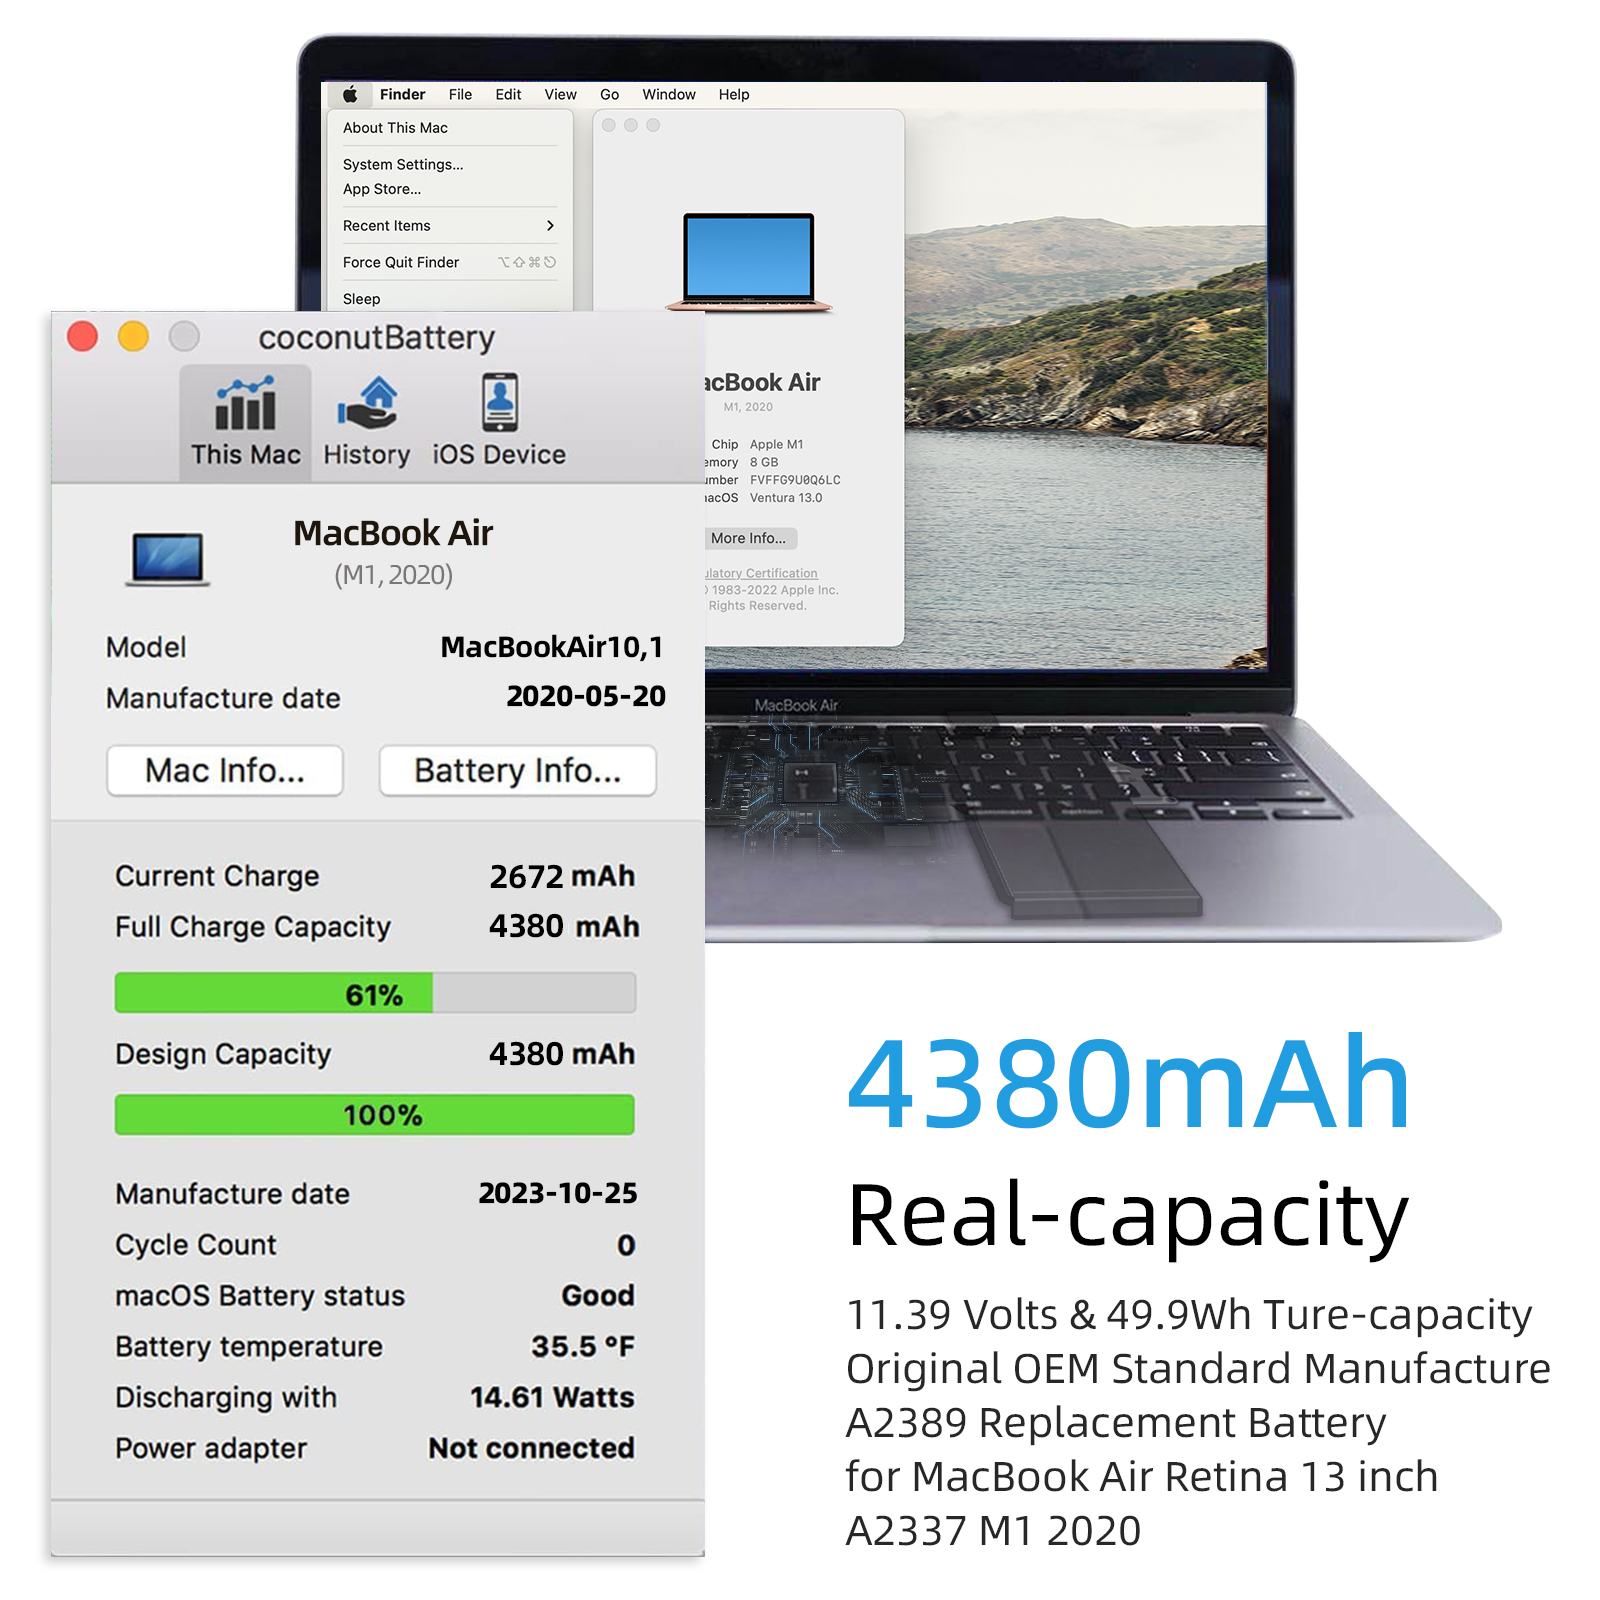 A2389 Replacement Battery for MacBook Air Retina 13 Inch Model A2337 2020 M1 EMC 3598